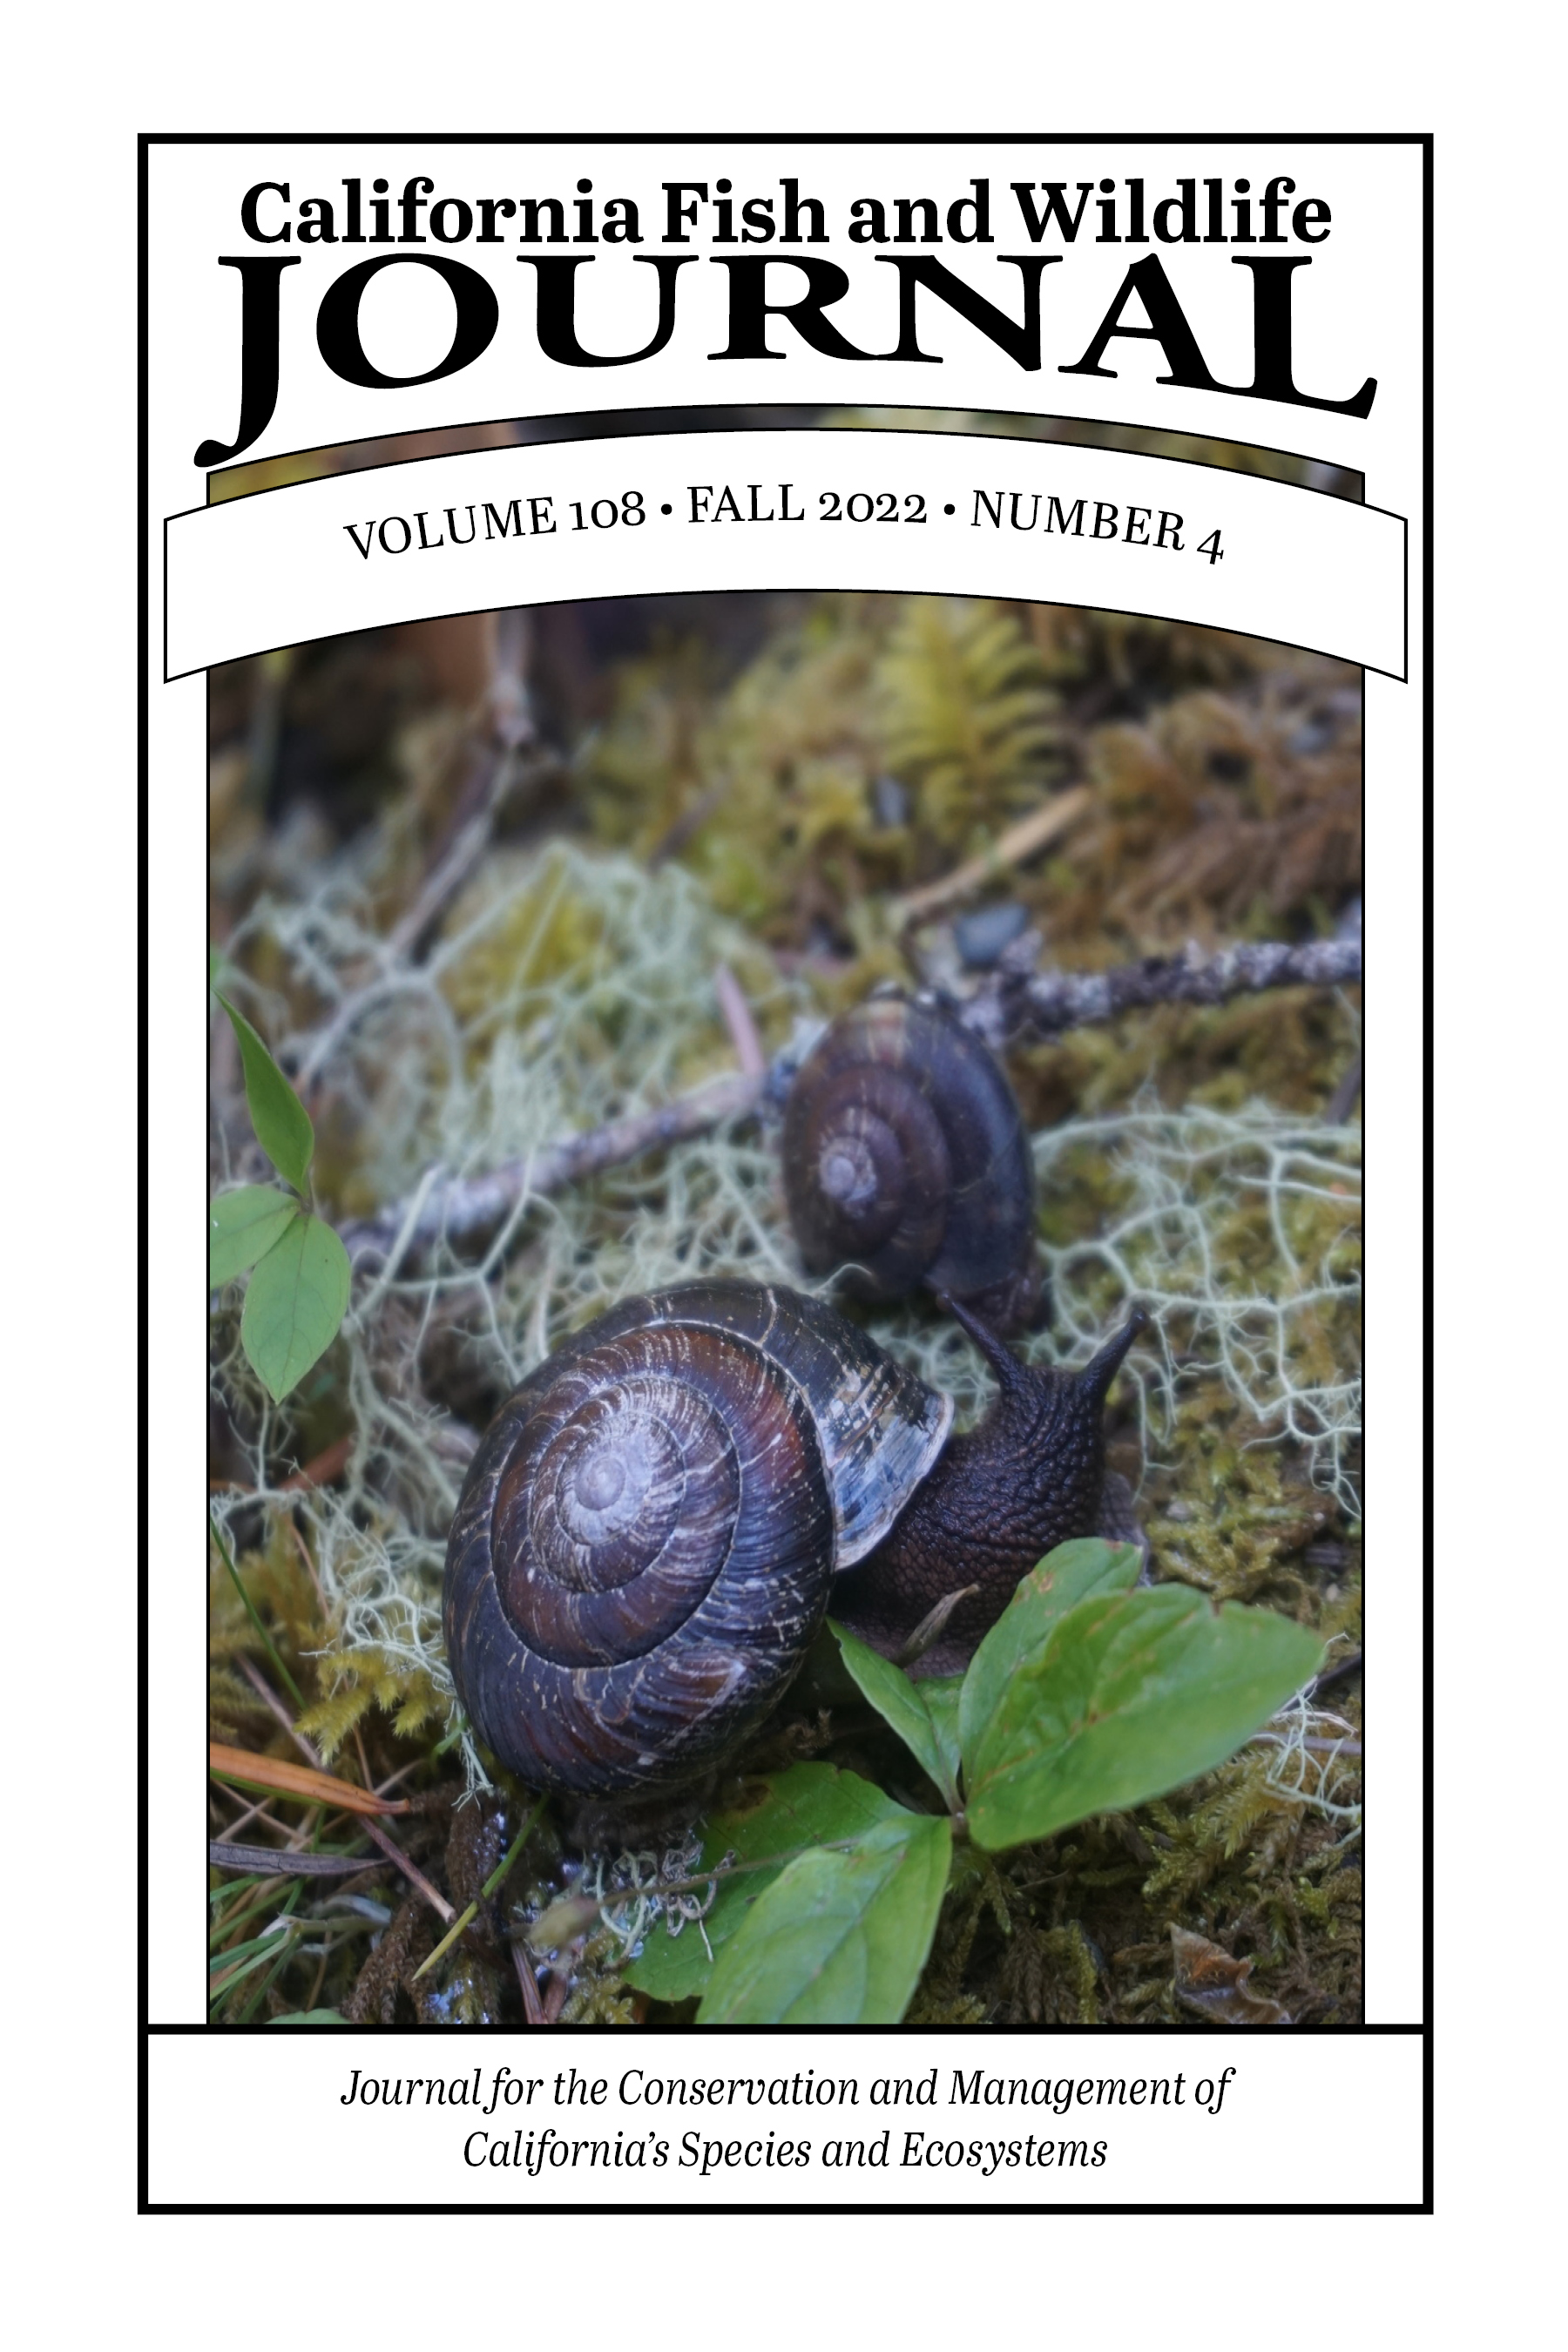 Cover of issue 108(4) with 2 Trinity bristle snails crawling through moss